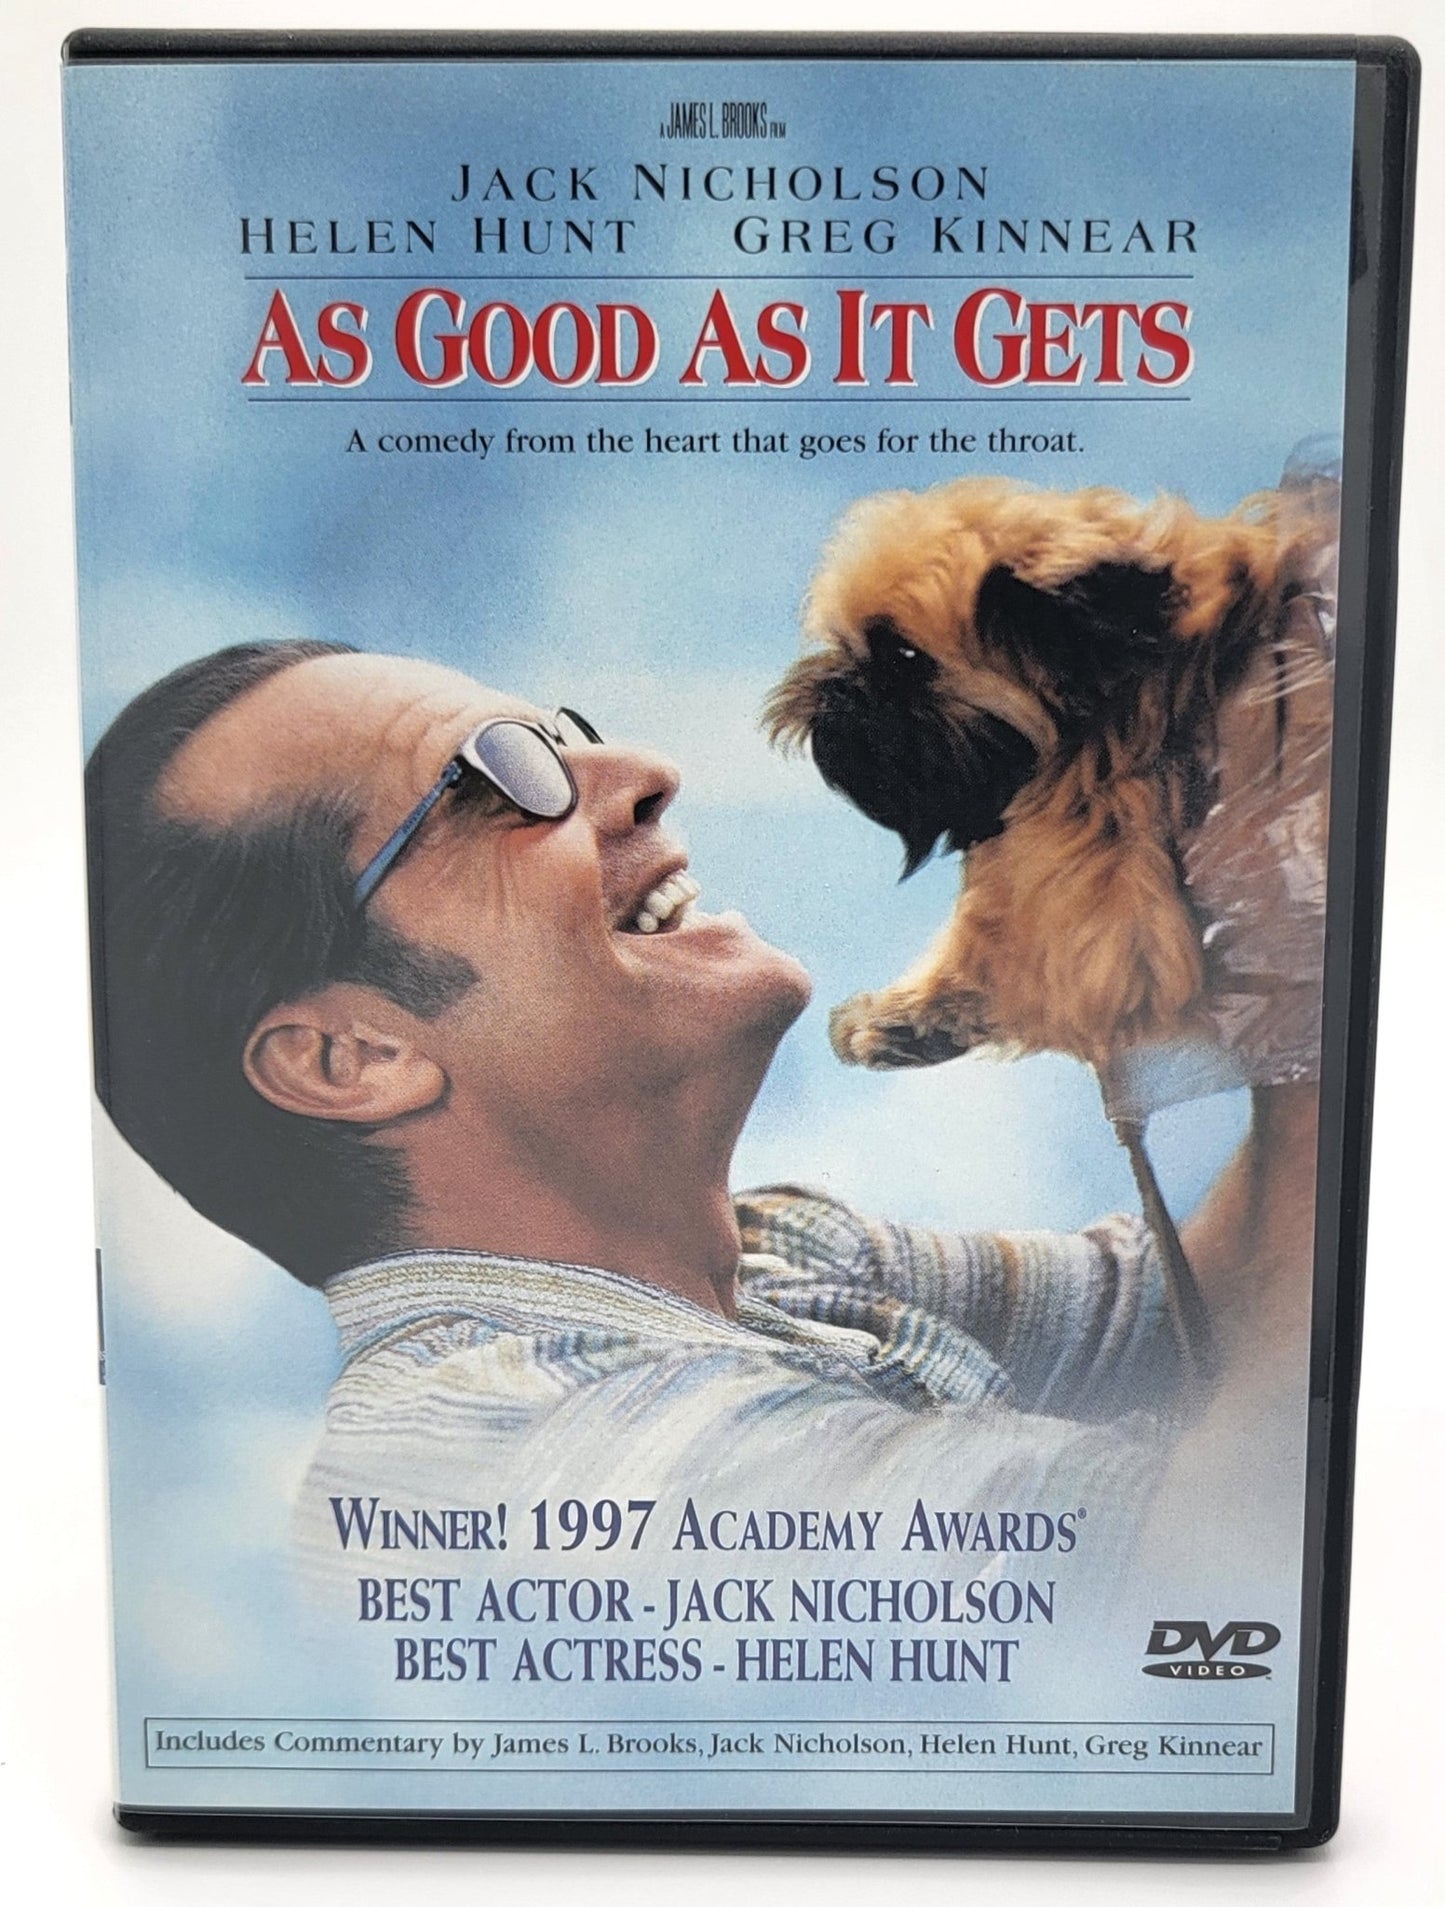 Sony Pictures Home Entertainment - As Good As it Gets | DVD | Widescreen - DVD - Steady Bunny Shop